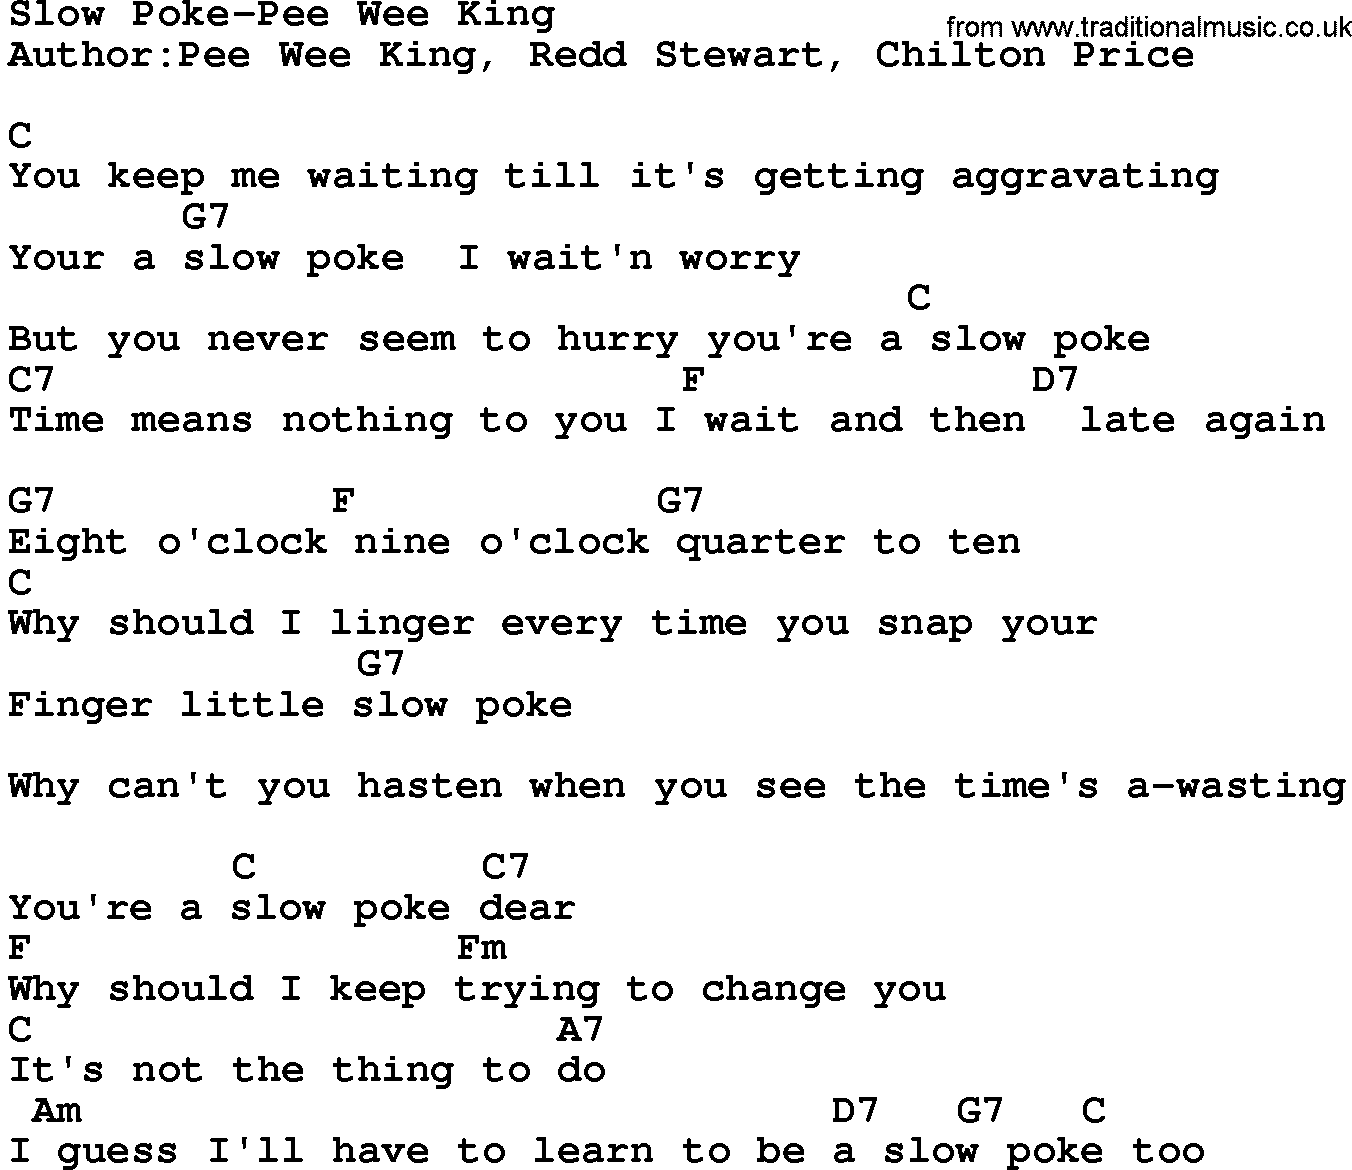 Country music song: Slow Poke-Pee Wee King lyrics and chords